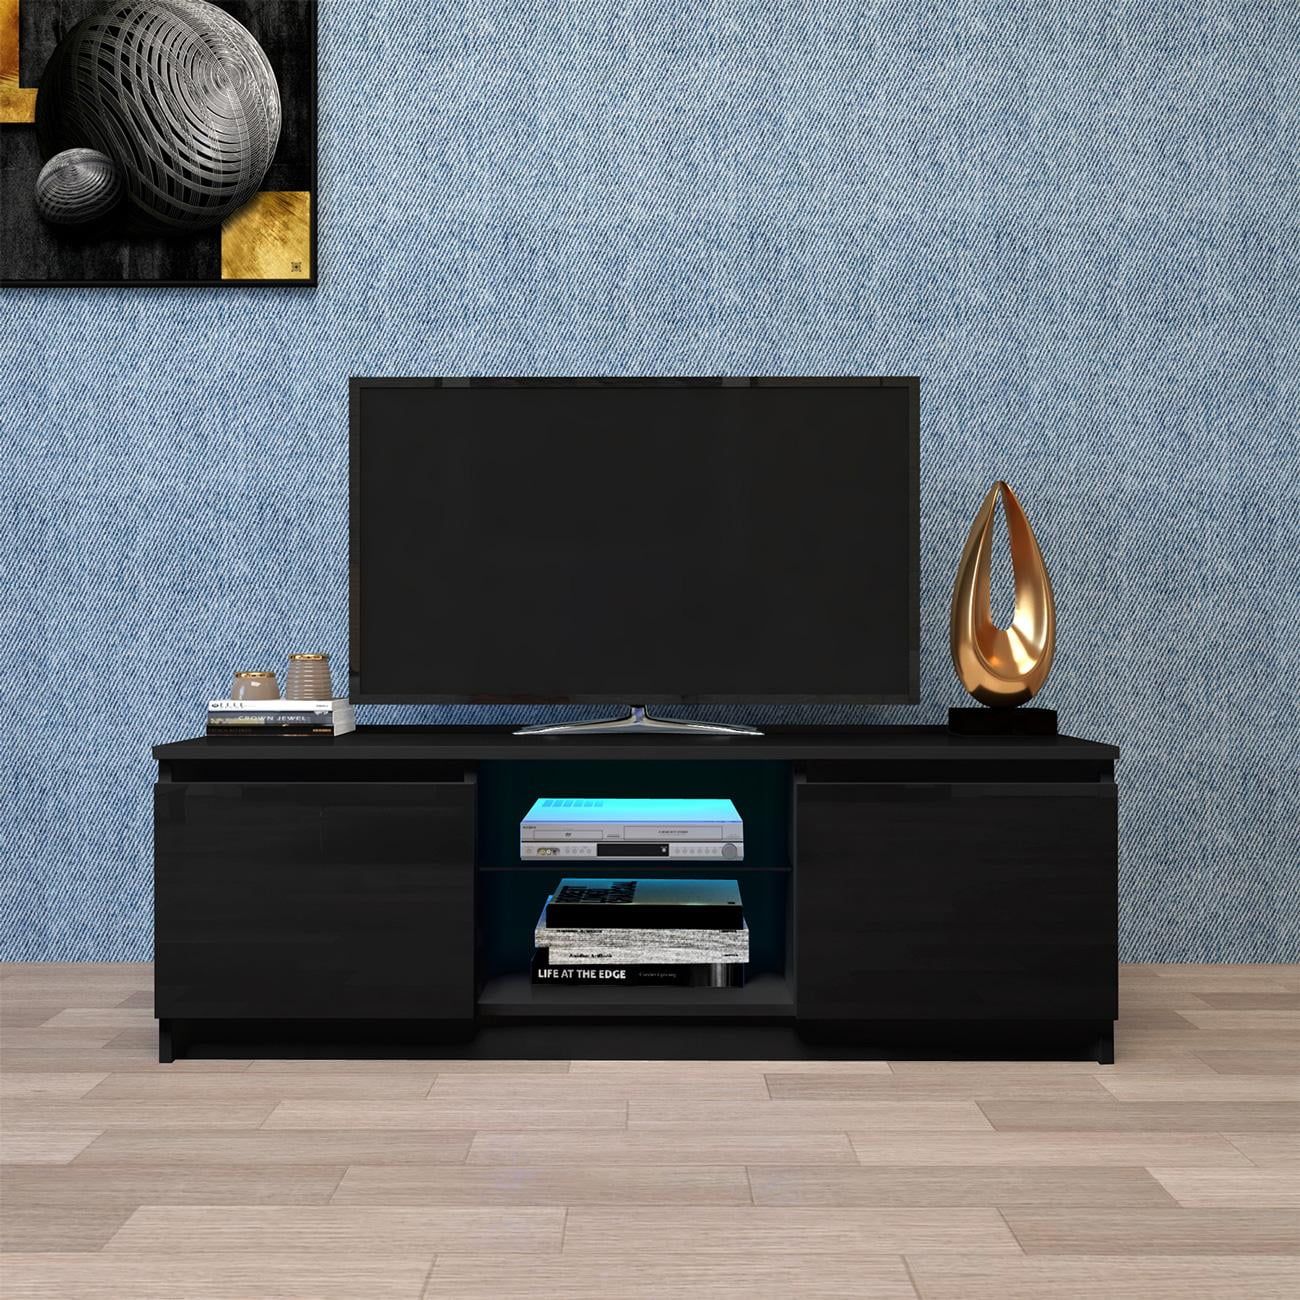 Tv Stand With Storage Drawers Shelves Led Rgb Lights, For Flat Tv 40 55 Inside Led Tv Stands With Outlet (View 17 of 20)